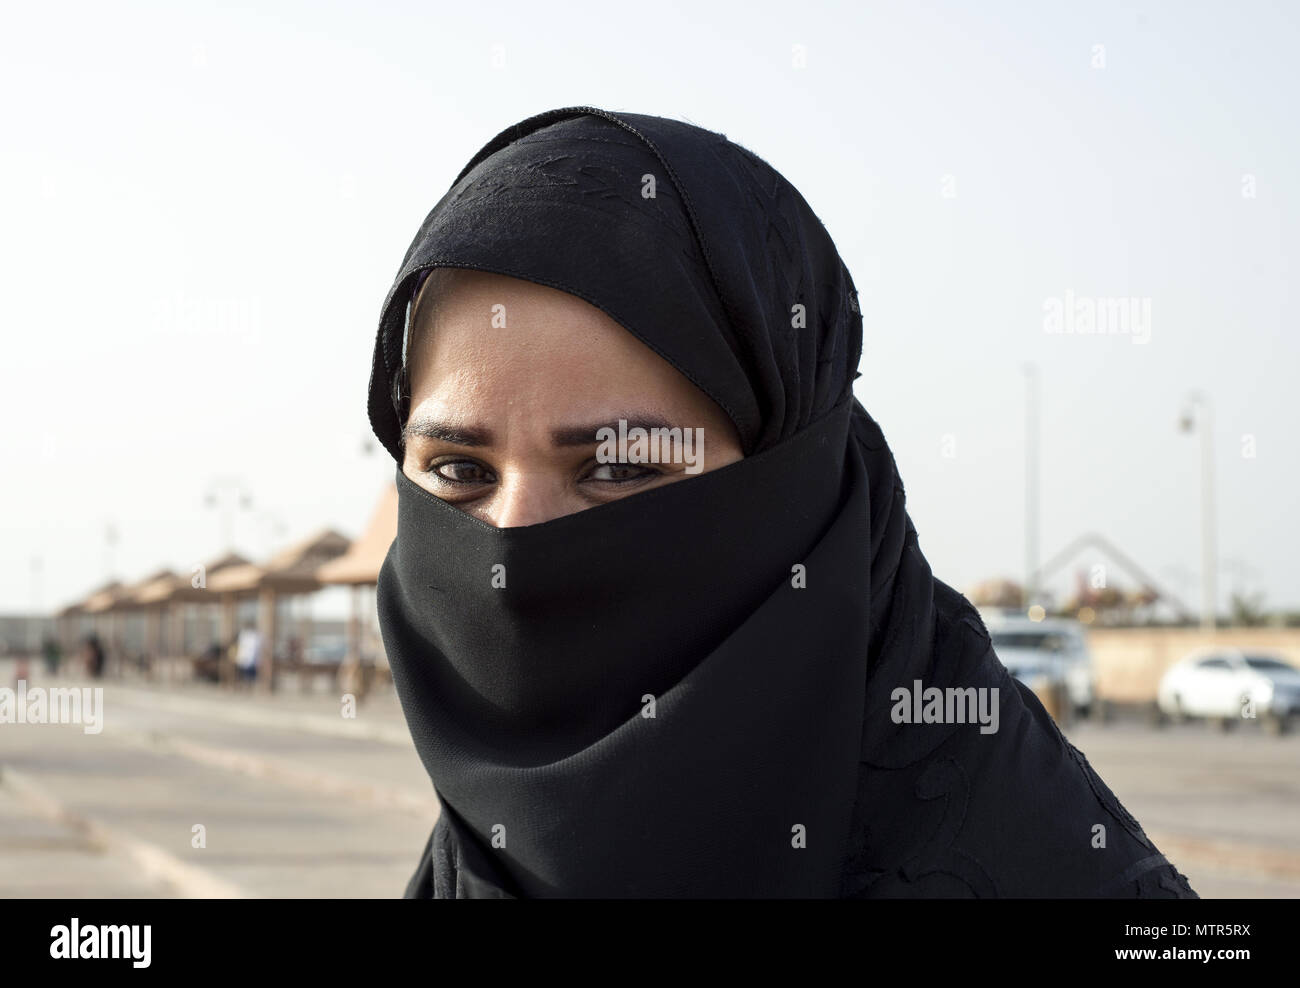 Saudi woman covered with hijab smiles for the camera Stock Photo